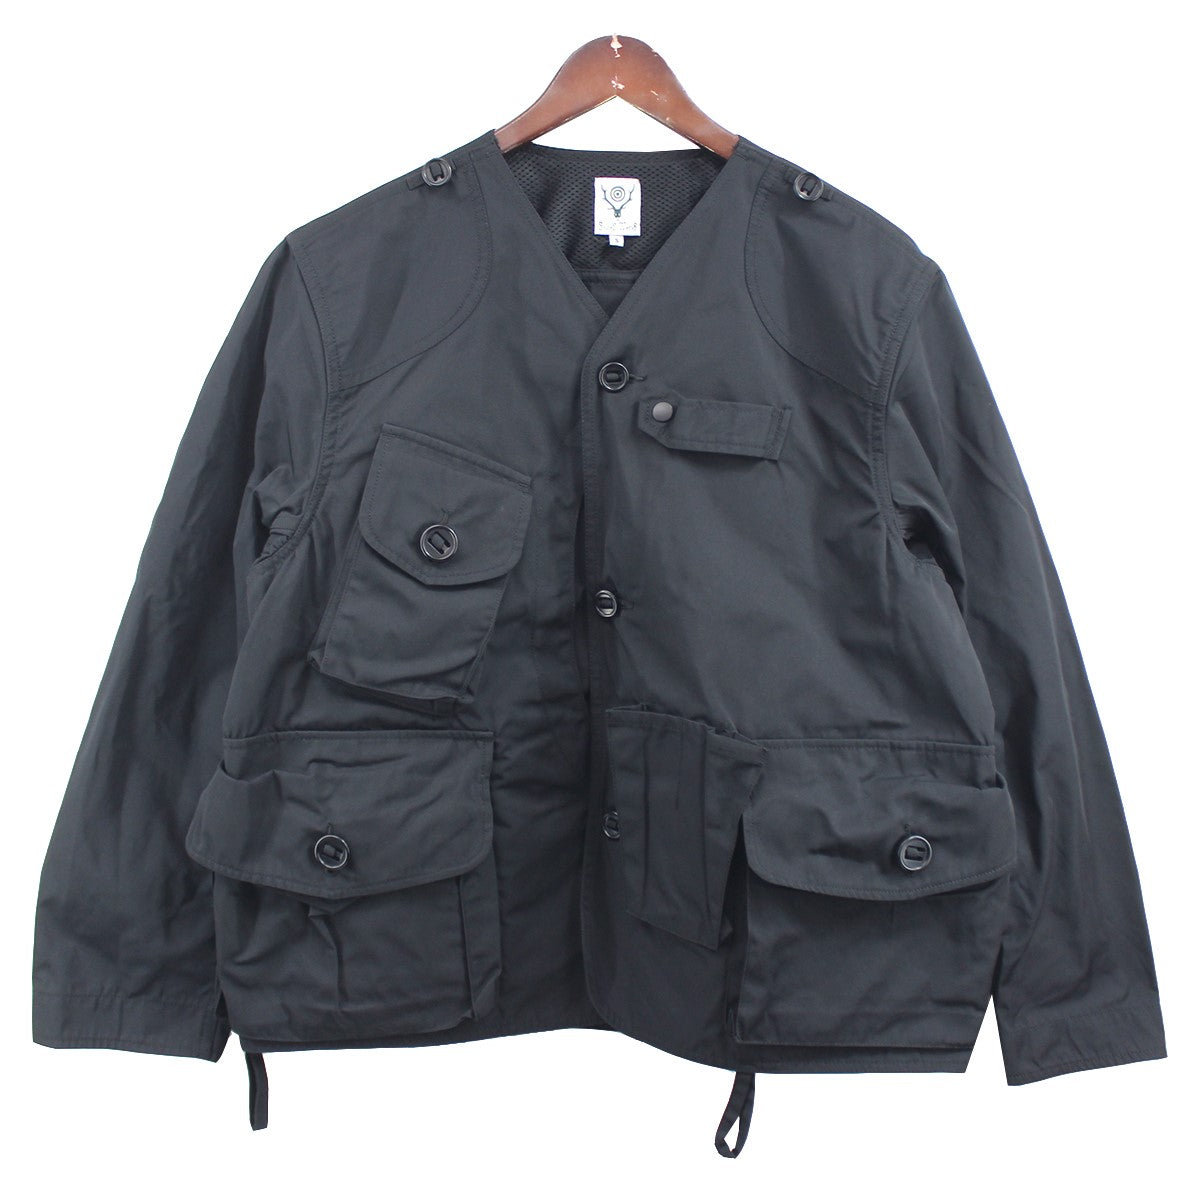 South2 West8 S2W8(サウスツーウエストエイト) 20AW TENKARA JACKET 